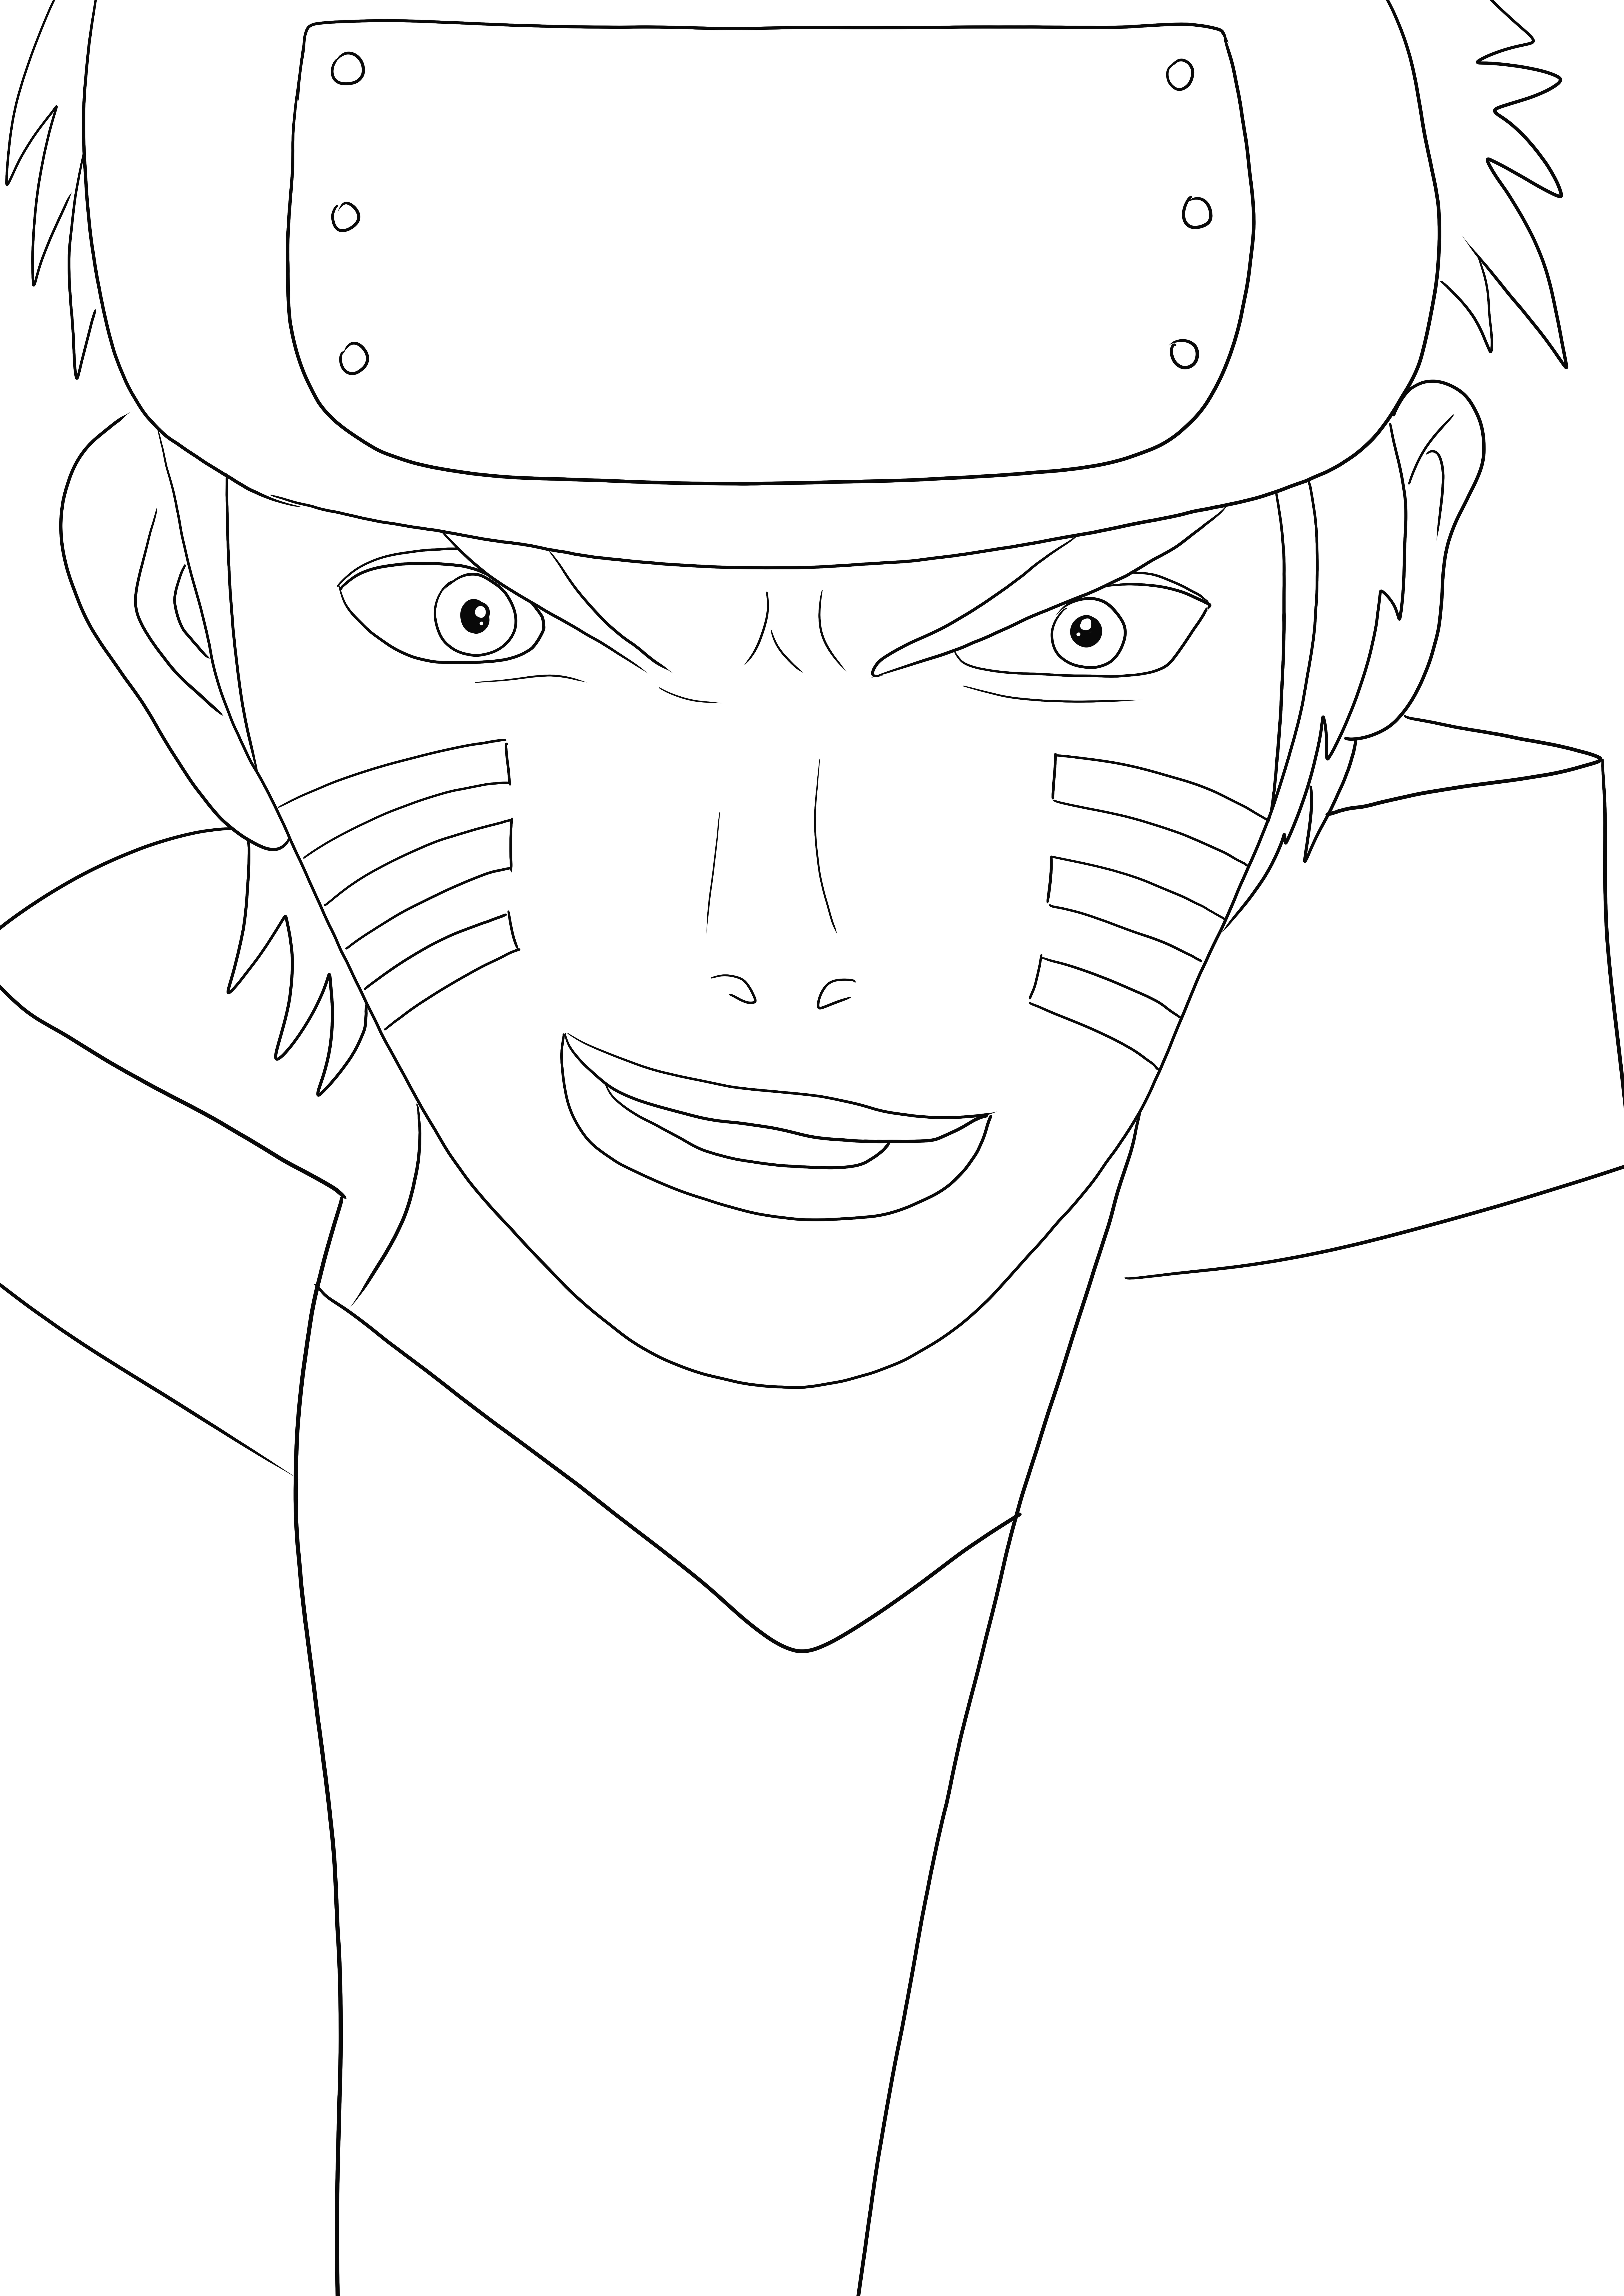 A cool coloring sheet of Naruto 687- is ready to be printed or downloaded